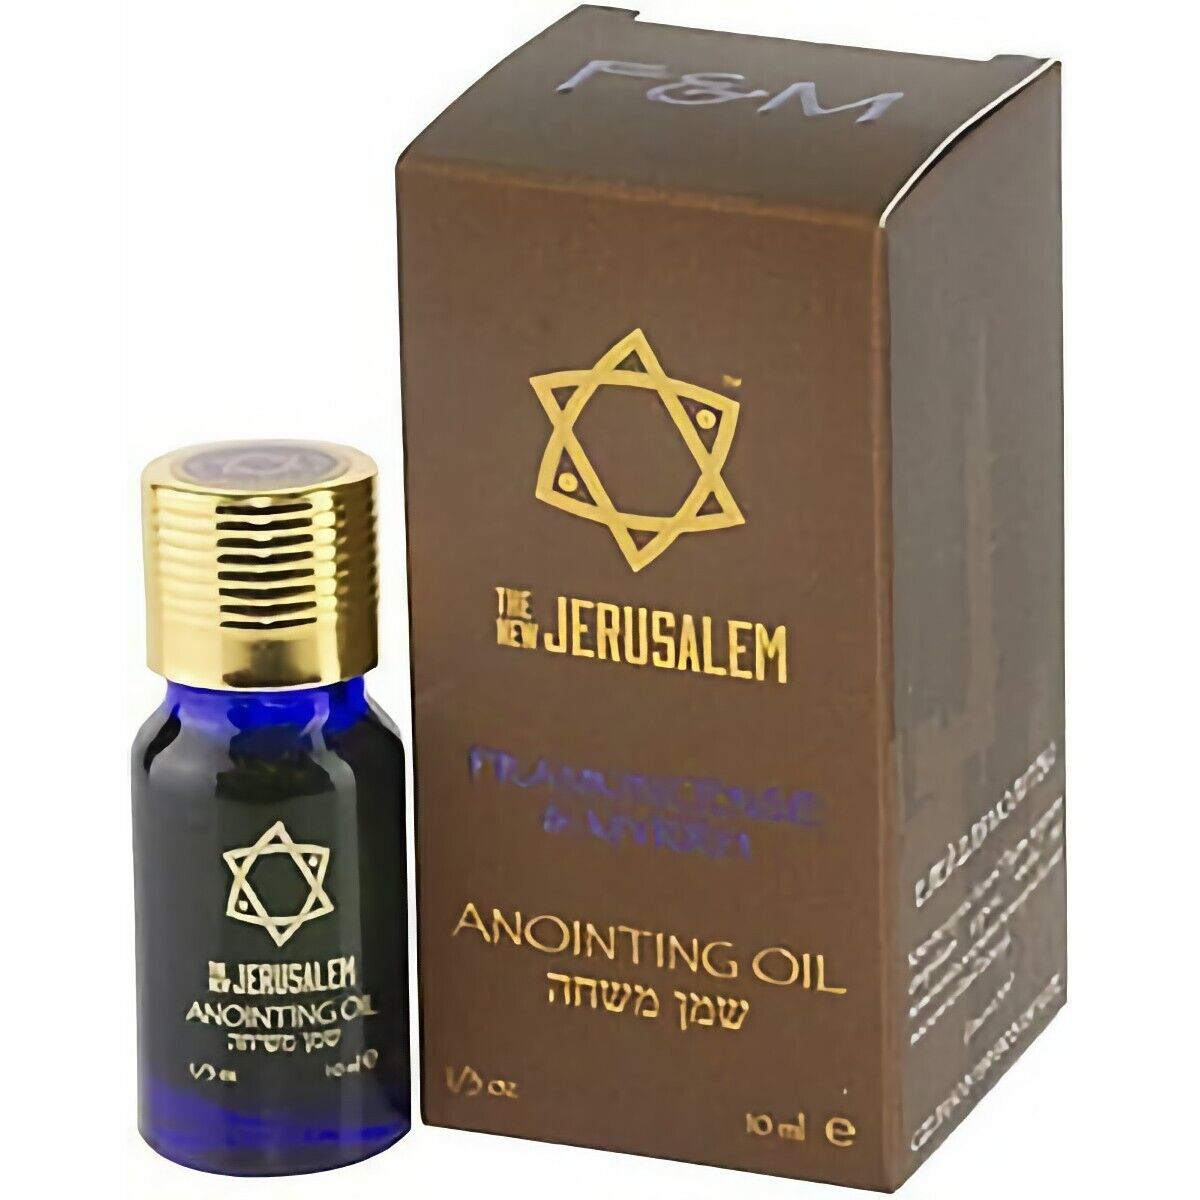 Premium Frankincense & Myrrh Anointing Oil Hand Made in Israel - 100% Natural, Pure EVOO & Essential Oils - Holy Bible Precious Gifts for Religious, Spiritual Use - Temple, Home, Diffuser 0.34 Fl Oz - 10 ml